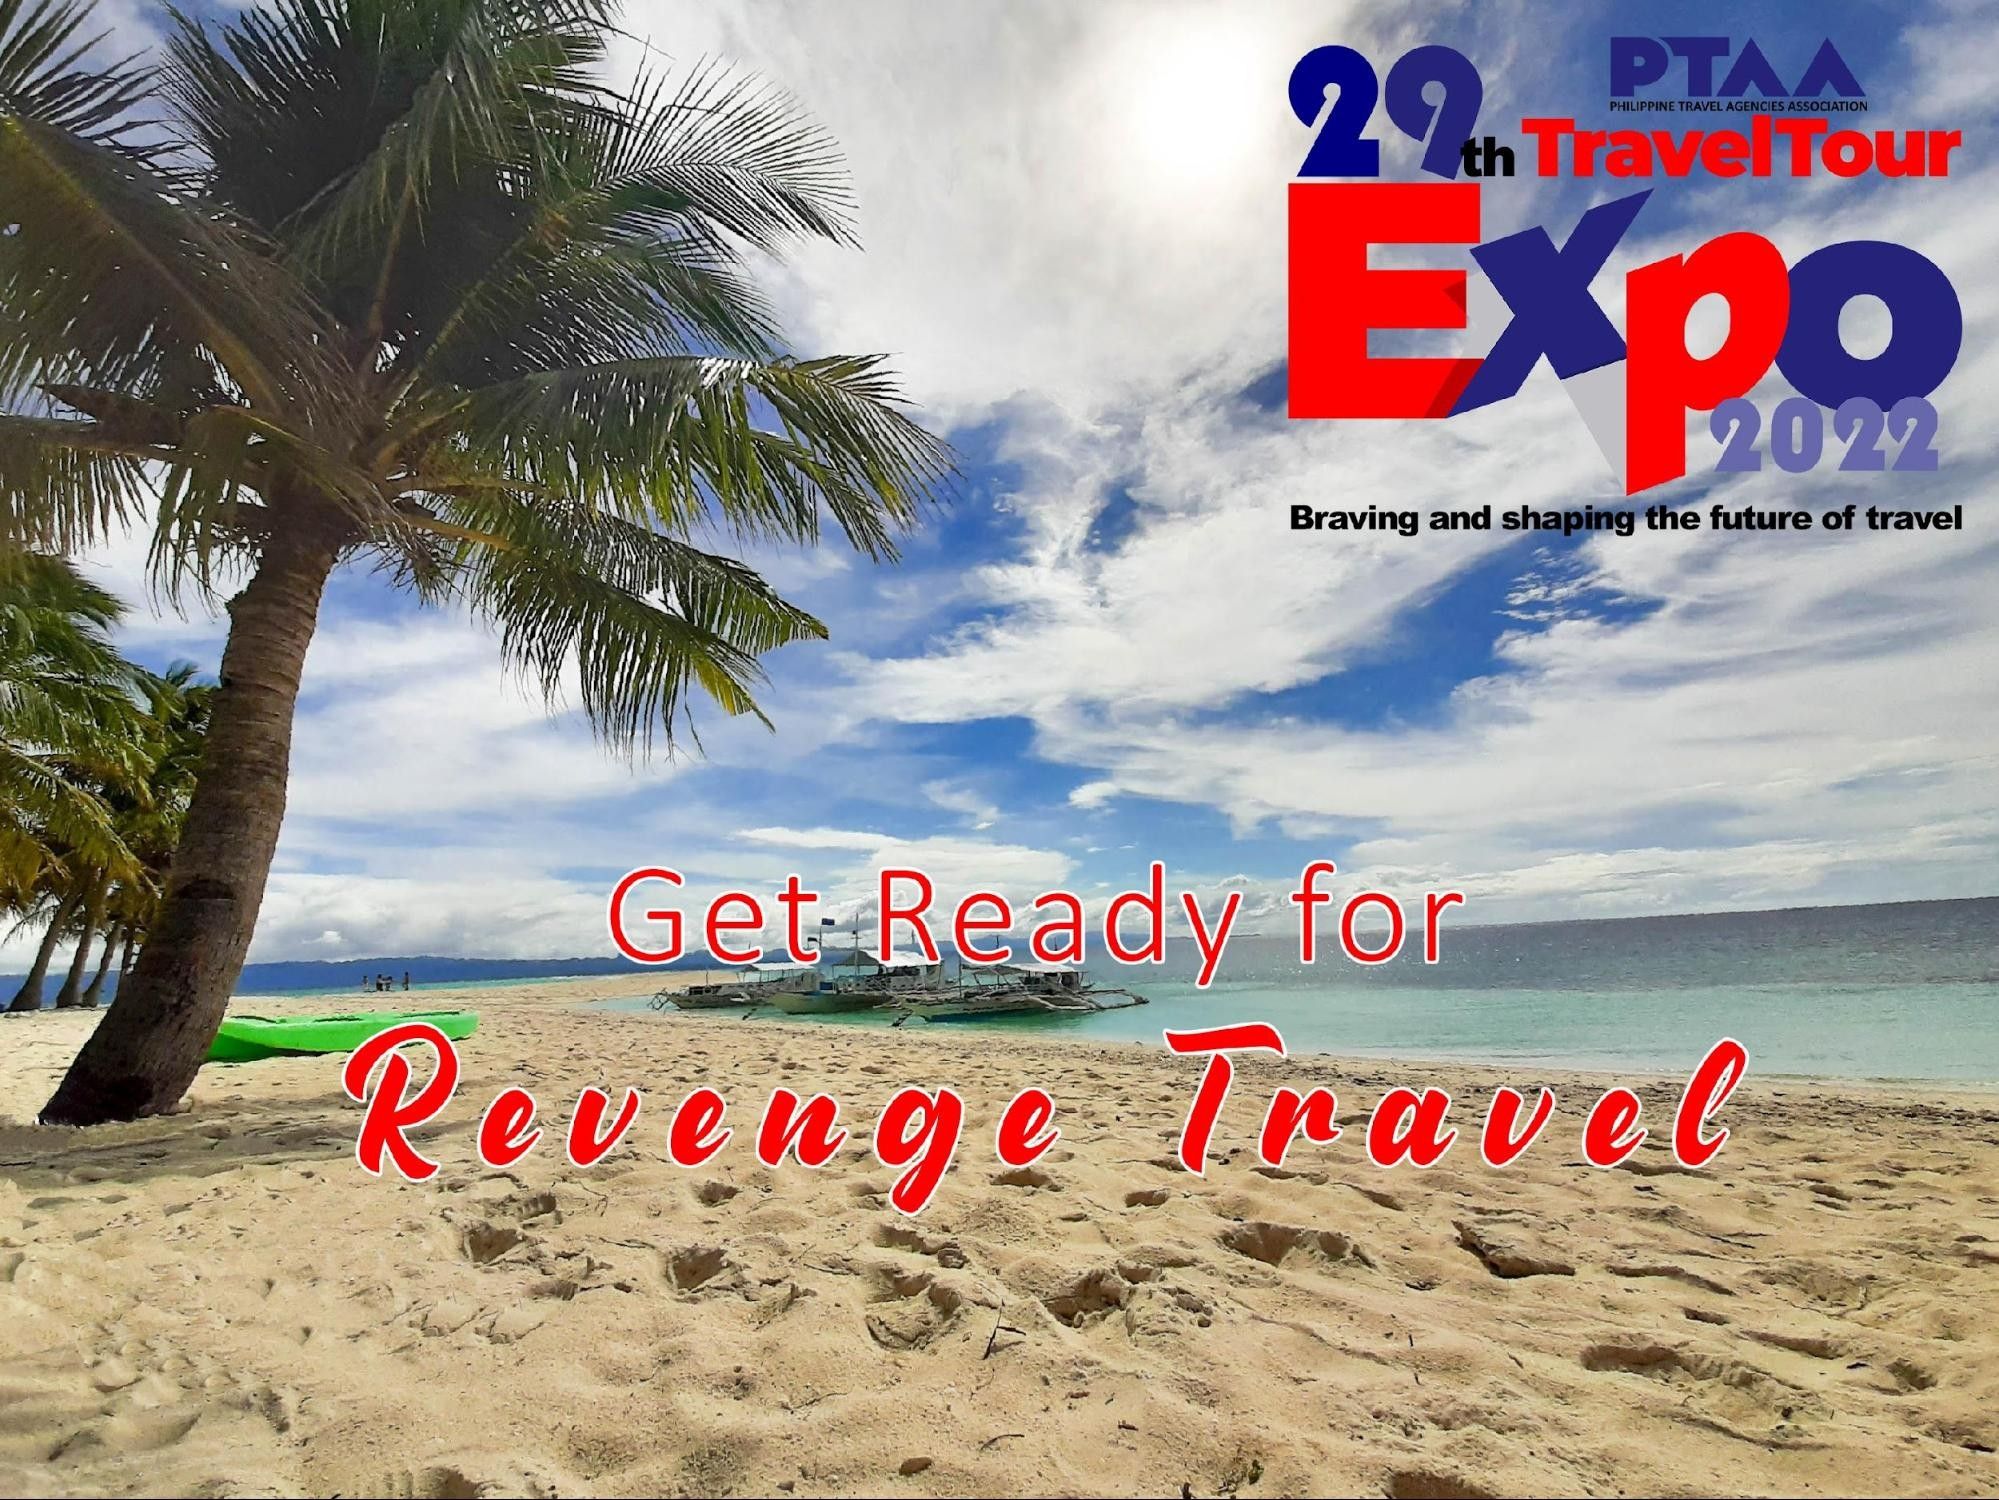 Book your ârevenge travelâ at two expos by Philippine Travel Agencies Association